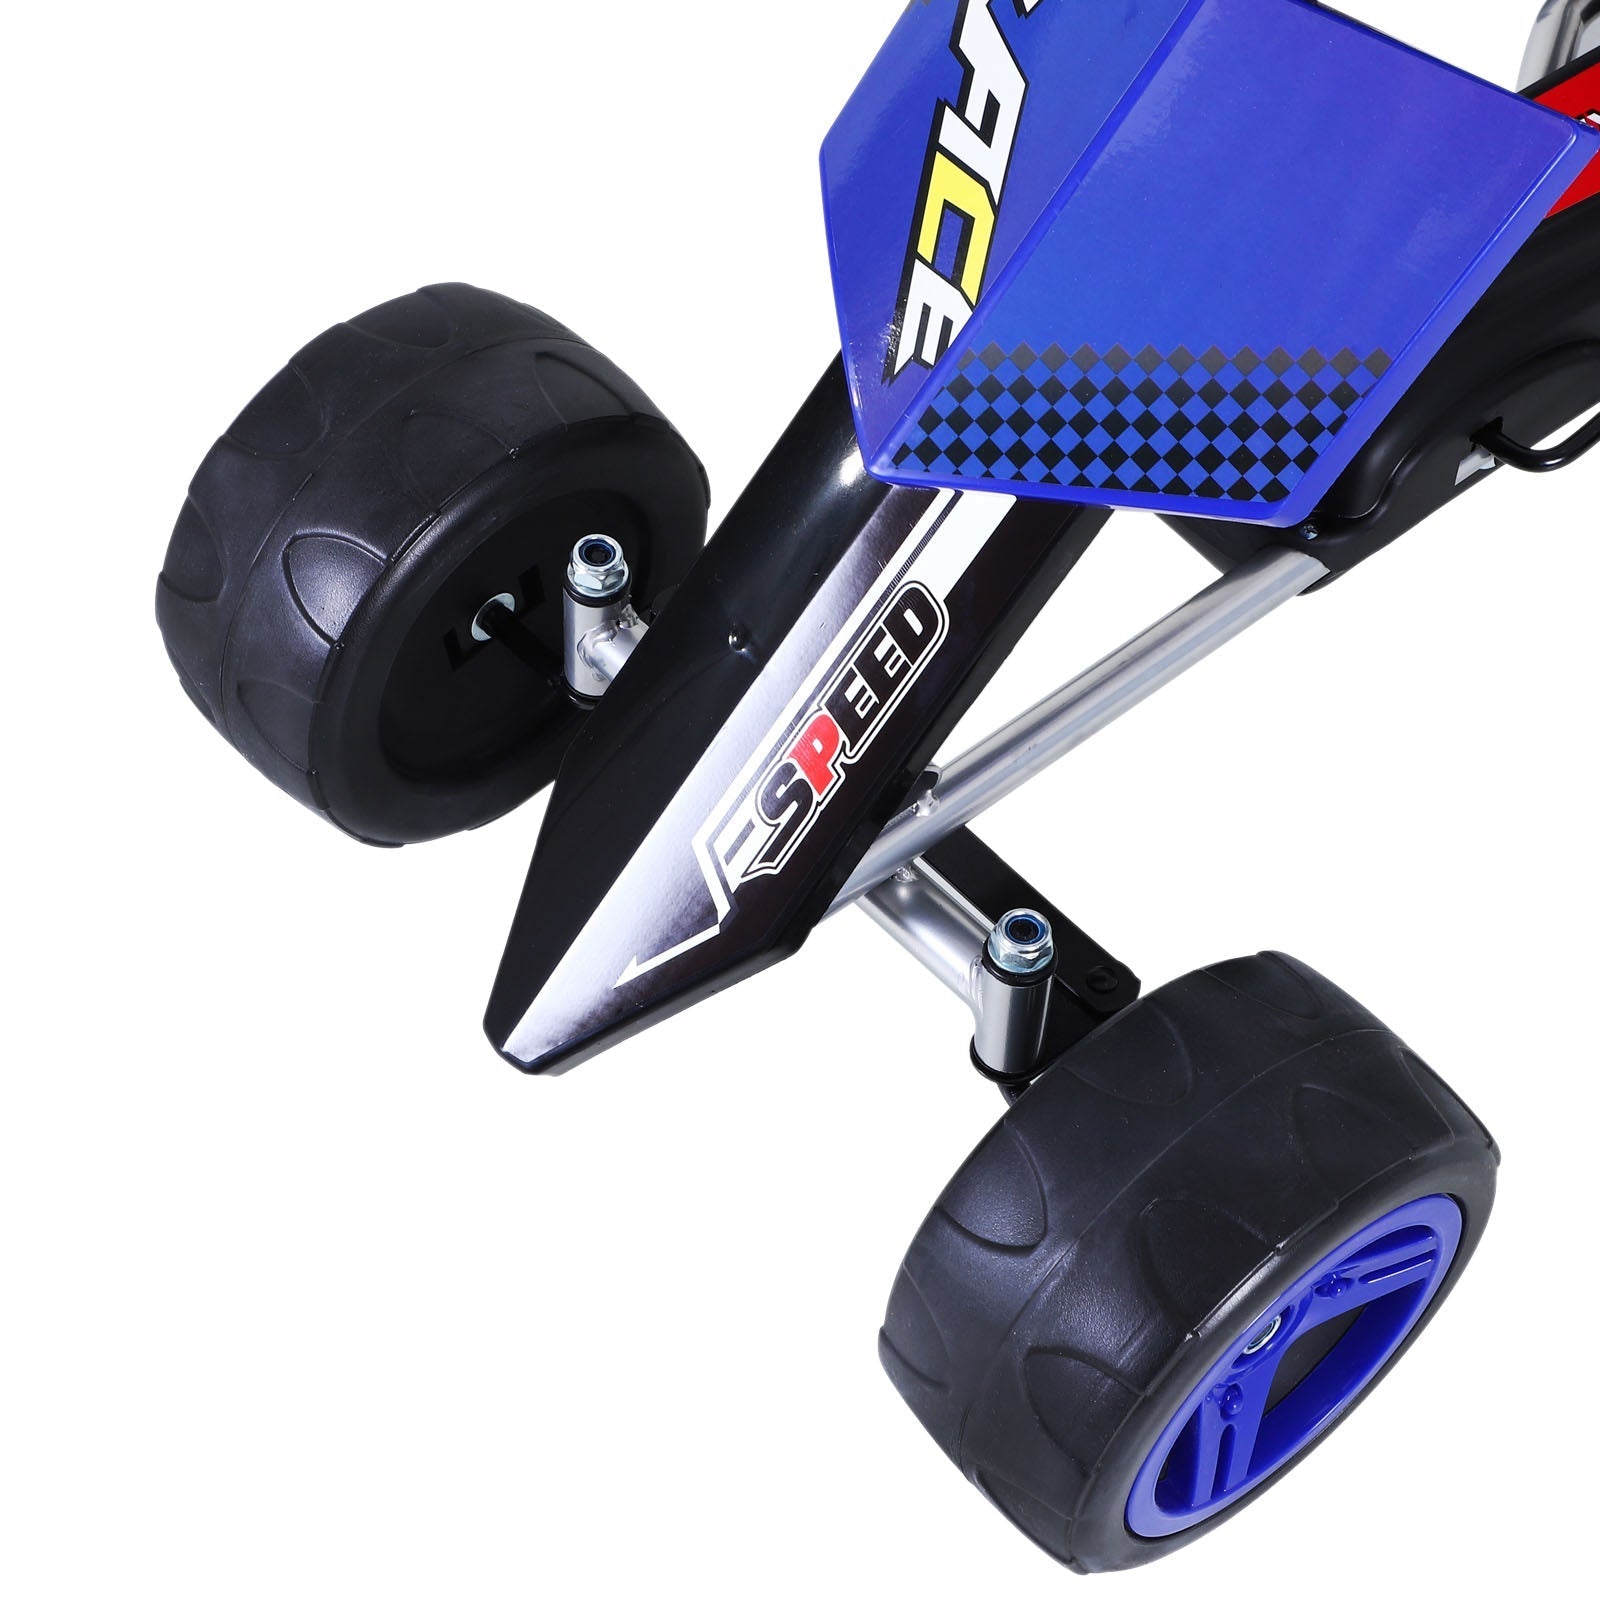 Kids Pedal Go Cart Children Ride On Car Racing Style Children Ride On Car Outdoor Racer Blue at Gallery Canada